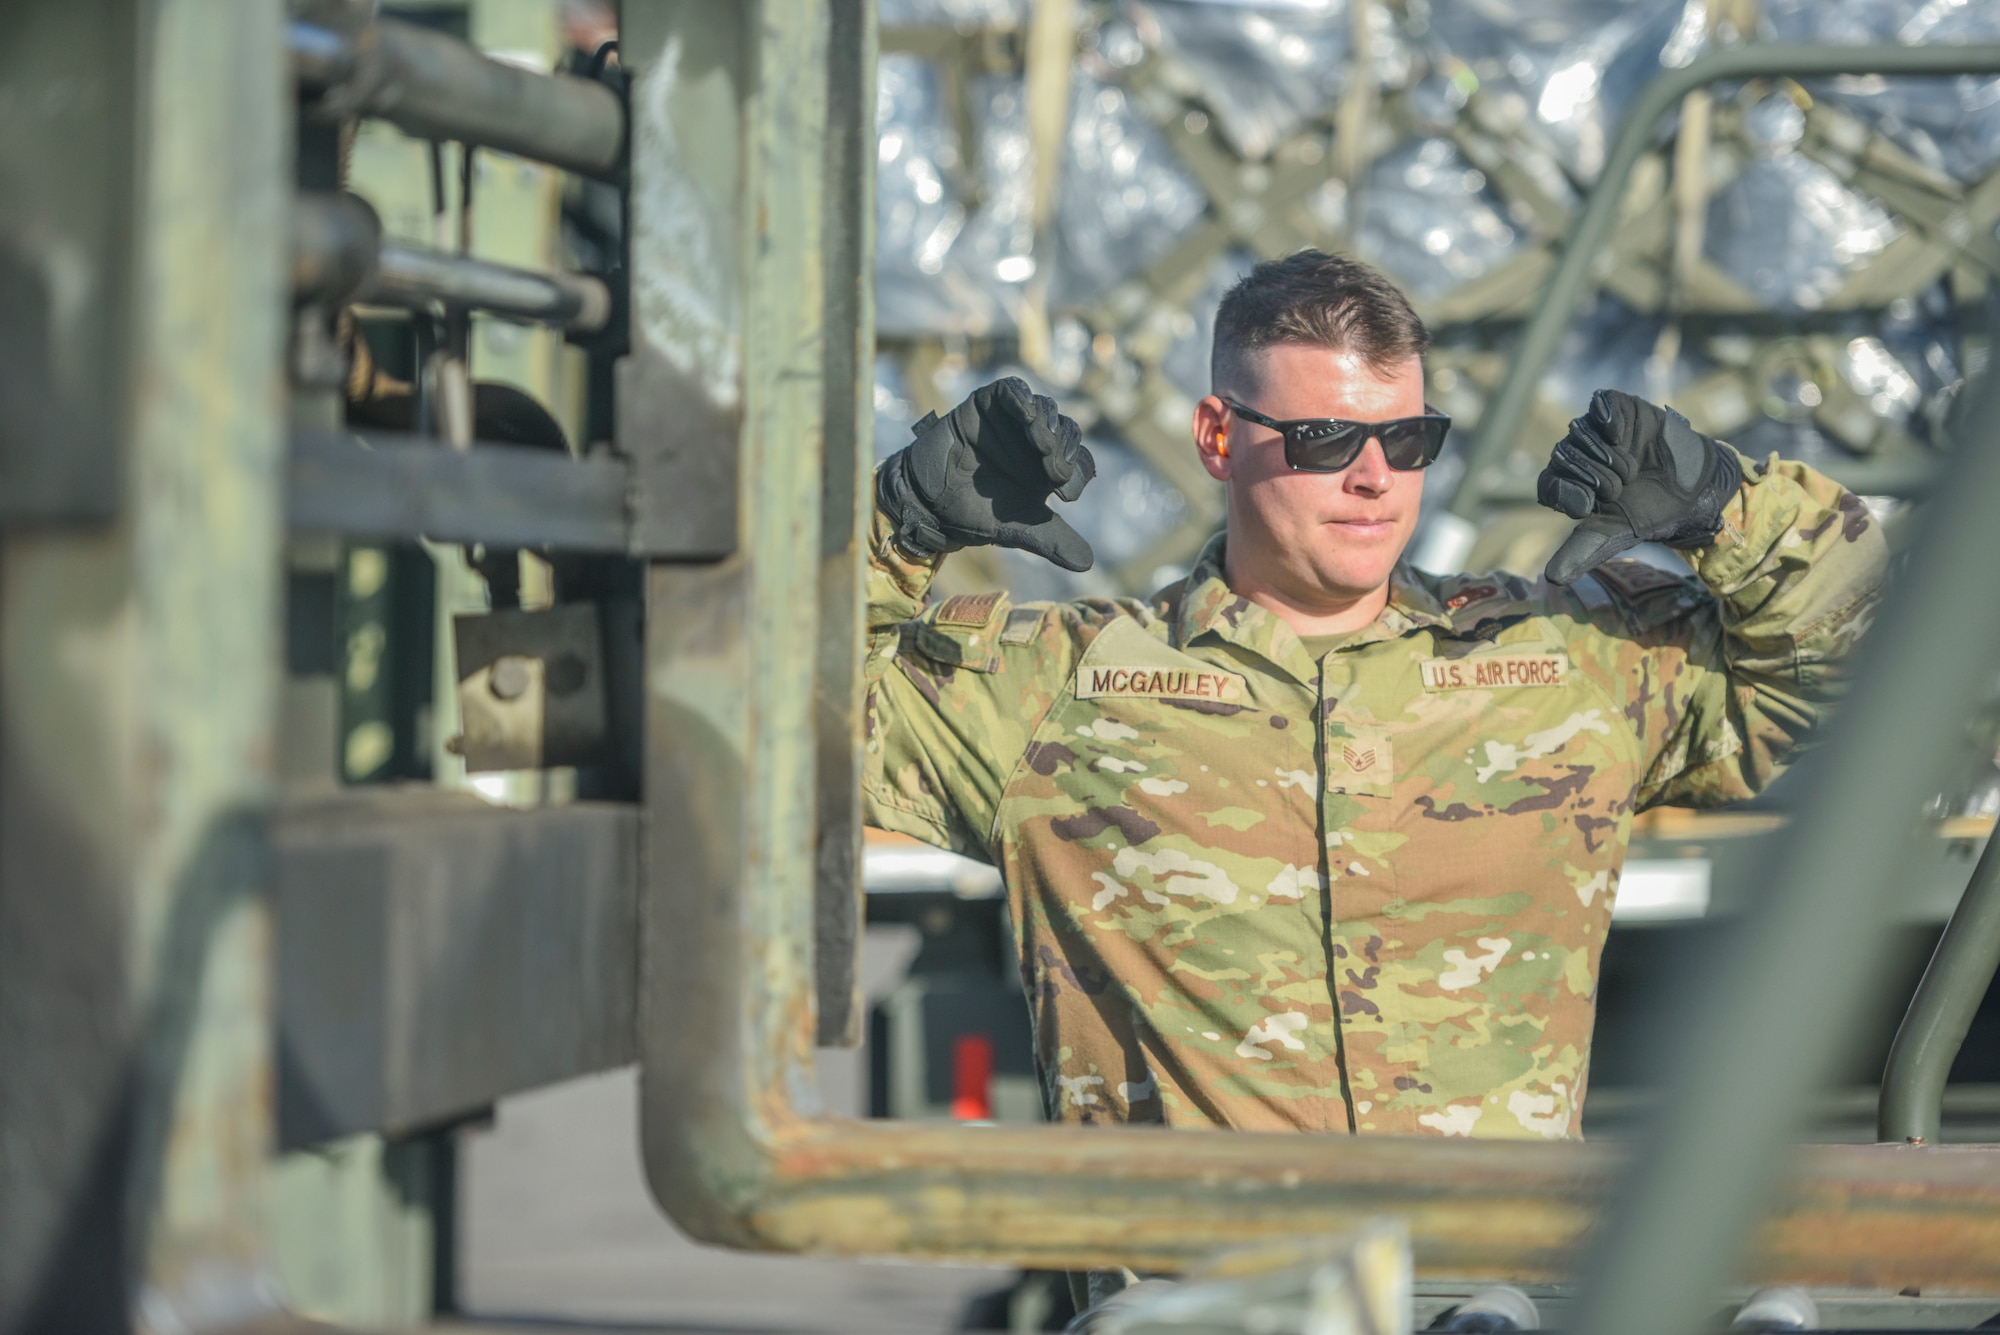 U.S. Air Force Staff Sgt. Kevin Mcgauley, 647th Logistics Readiness Squadron combat mobility flight team chief, spots a forklift driver at Joint Base Pearl Harbor-Hickam, Hawaii, Dec. 22, 2021. 647th LRS recieved a total of 15 pallets of charcoal filters weighing 75 tons in support of the water recovery efforts on Oahu.   (U.S. Air Force photo by Tech. Sgt. Anthony Nelson Jr.)